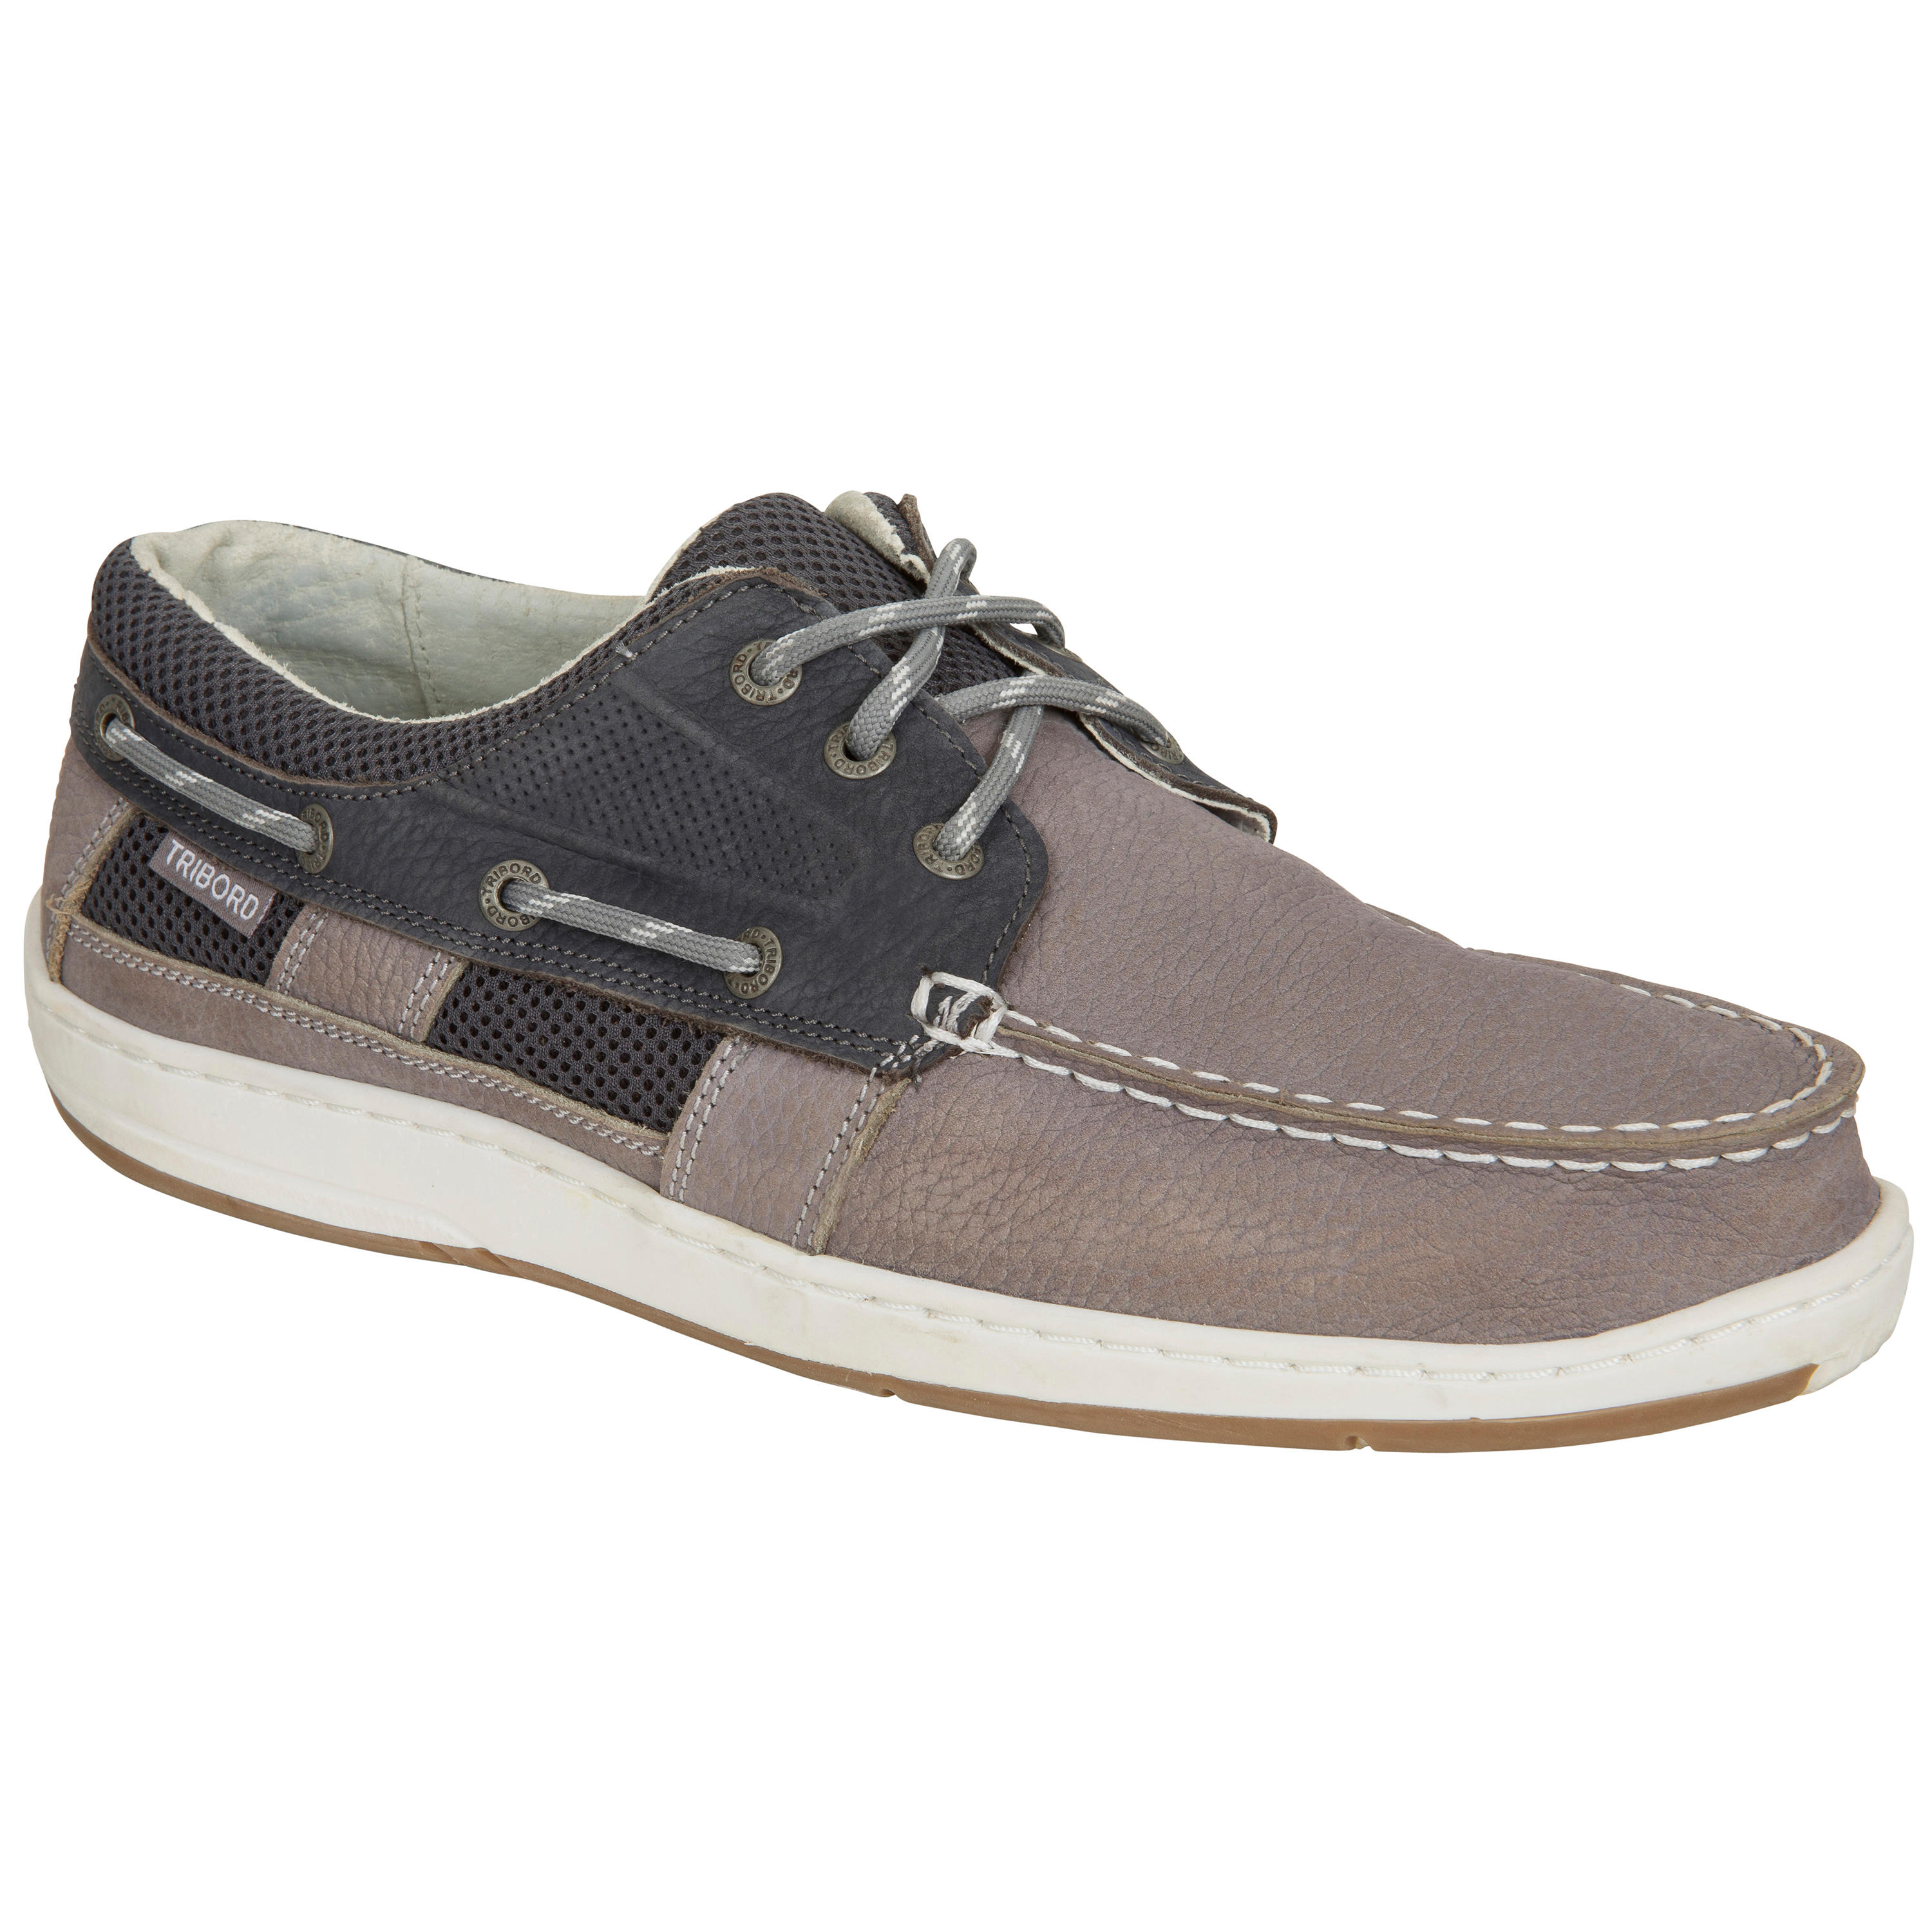 Men's Leather Boat Shoes CLIPPER - Grey 5/9